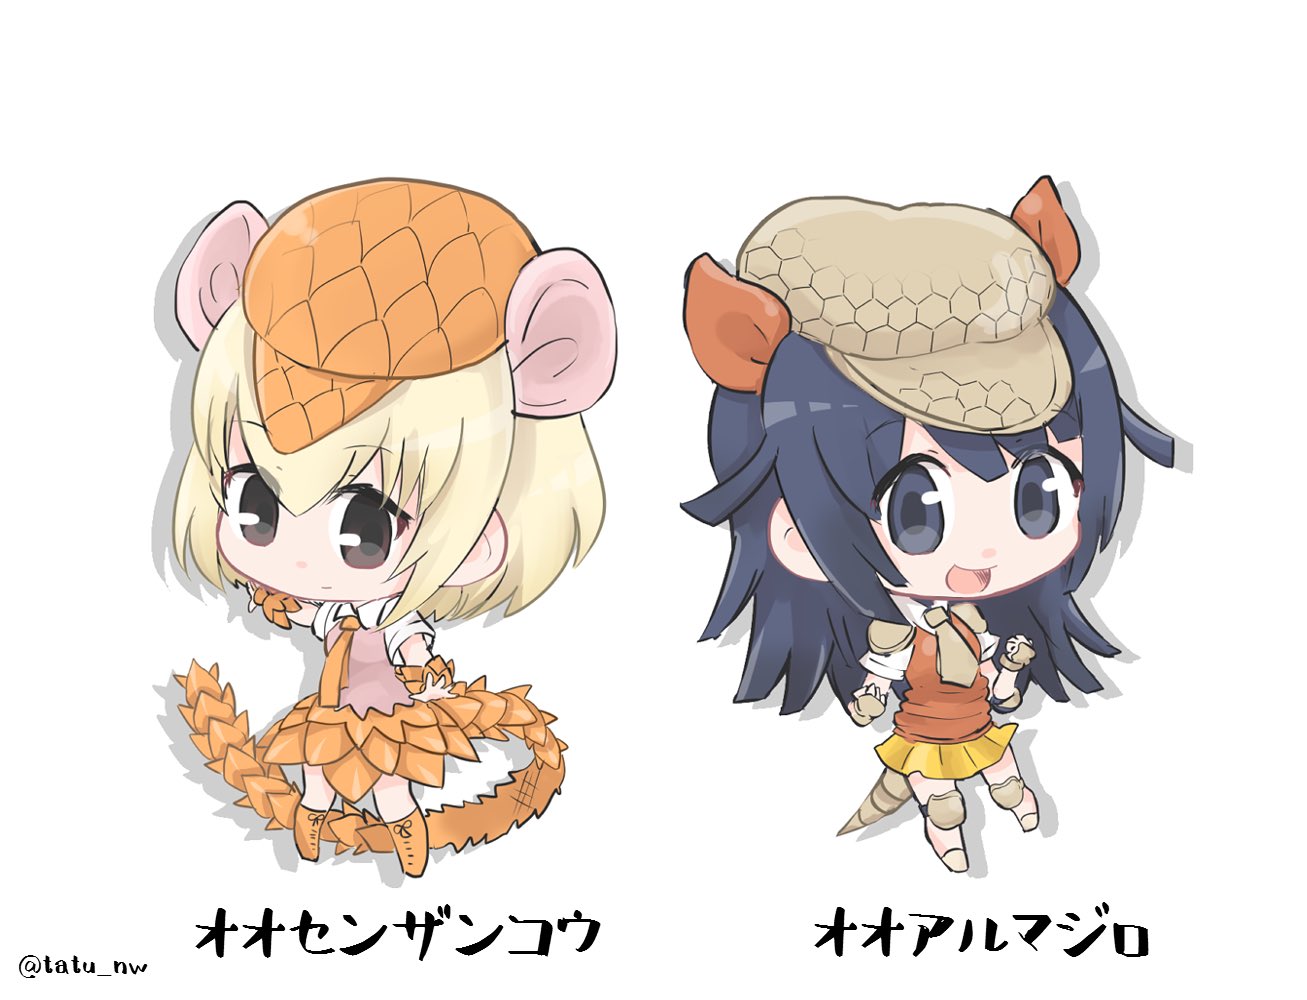 2girls :d :| animal_ears armadillo_ears armadillo_tail beige_hat beret blonde_hair blue_eyes blue_hair boots brown_eyes character_name chibi closed_mouth collar collared_shirt commentary_request eyebrows_visible_through_hair full_body giant_armadillo_(kemono_friends) giant_pangolin_(kemono_friends) hair_between_eyes hat kemono_friends knee_pads light_smile long_hair looking_at_viewer multiple_girls necktie open_mouth orange_boots orange_hat orange_necktie orange_skirt orange_vest pangolin_ears pangolin_tail pink_vest pleated_skirt shadow shirt shoelaces short_hair short_sleeves shoulder_pads simple_background skirt sleeveless smile standing tail tatu_nw twitter_username vest white_background white_shirt yellow_skirt